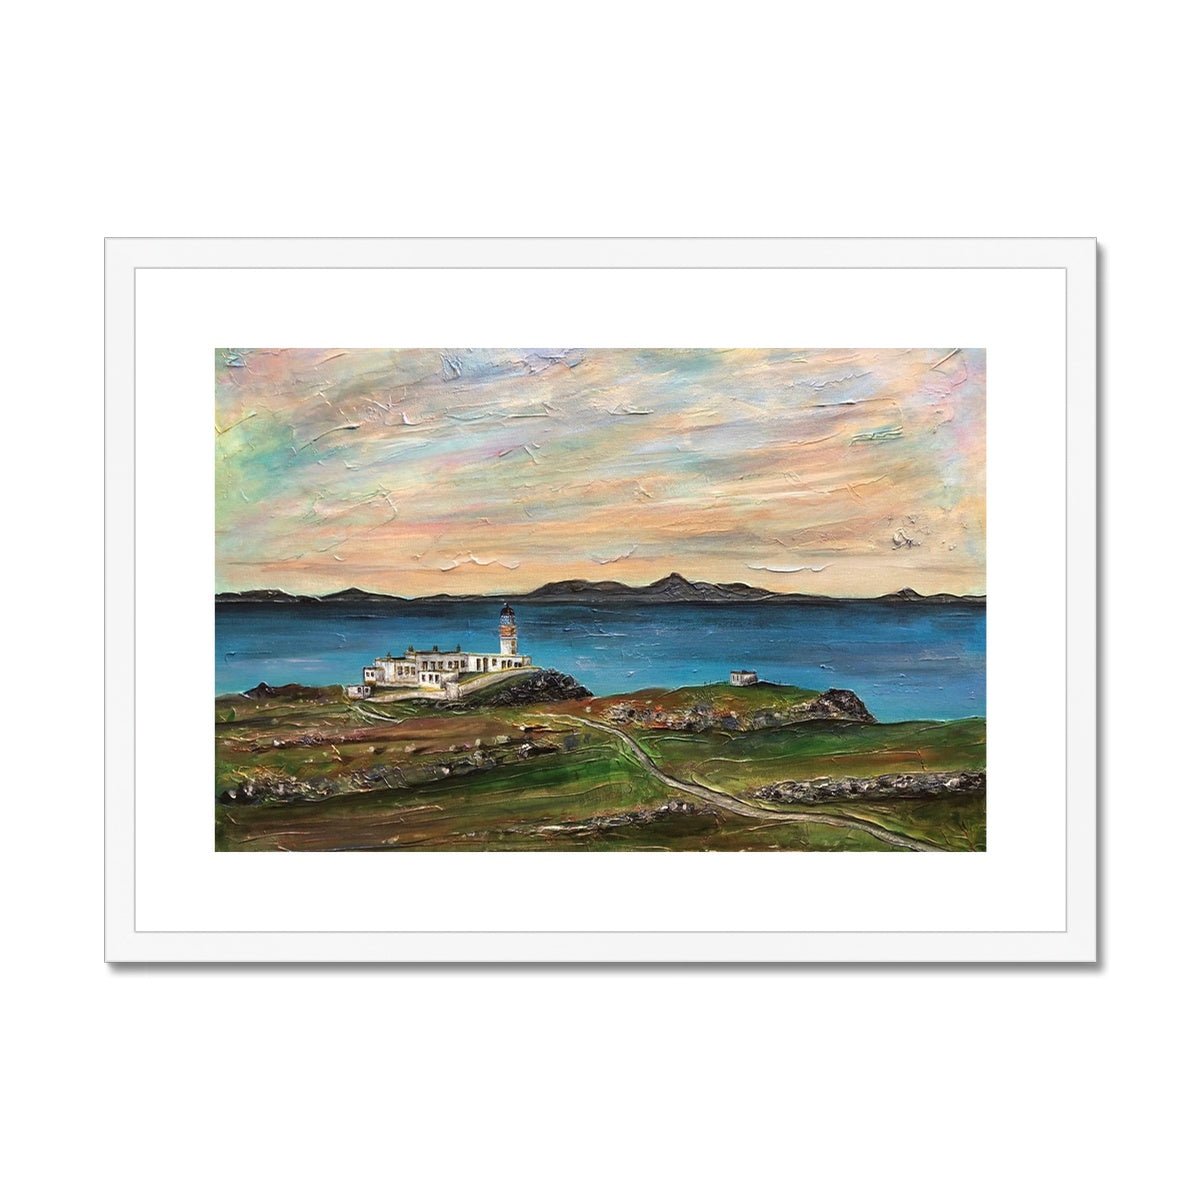 Neist Point Skye Painting | Framed & Mounted Prints From Scotland-Framed & Mounted Prints-Skye Art Gallery-A2 Landscape-White Frame-Paintings, Prints, Homeware, Art Gifts From Scotland By Scottish Artist Kevin Hunter